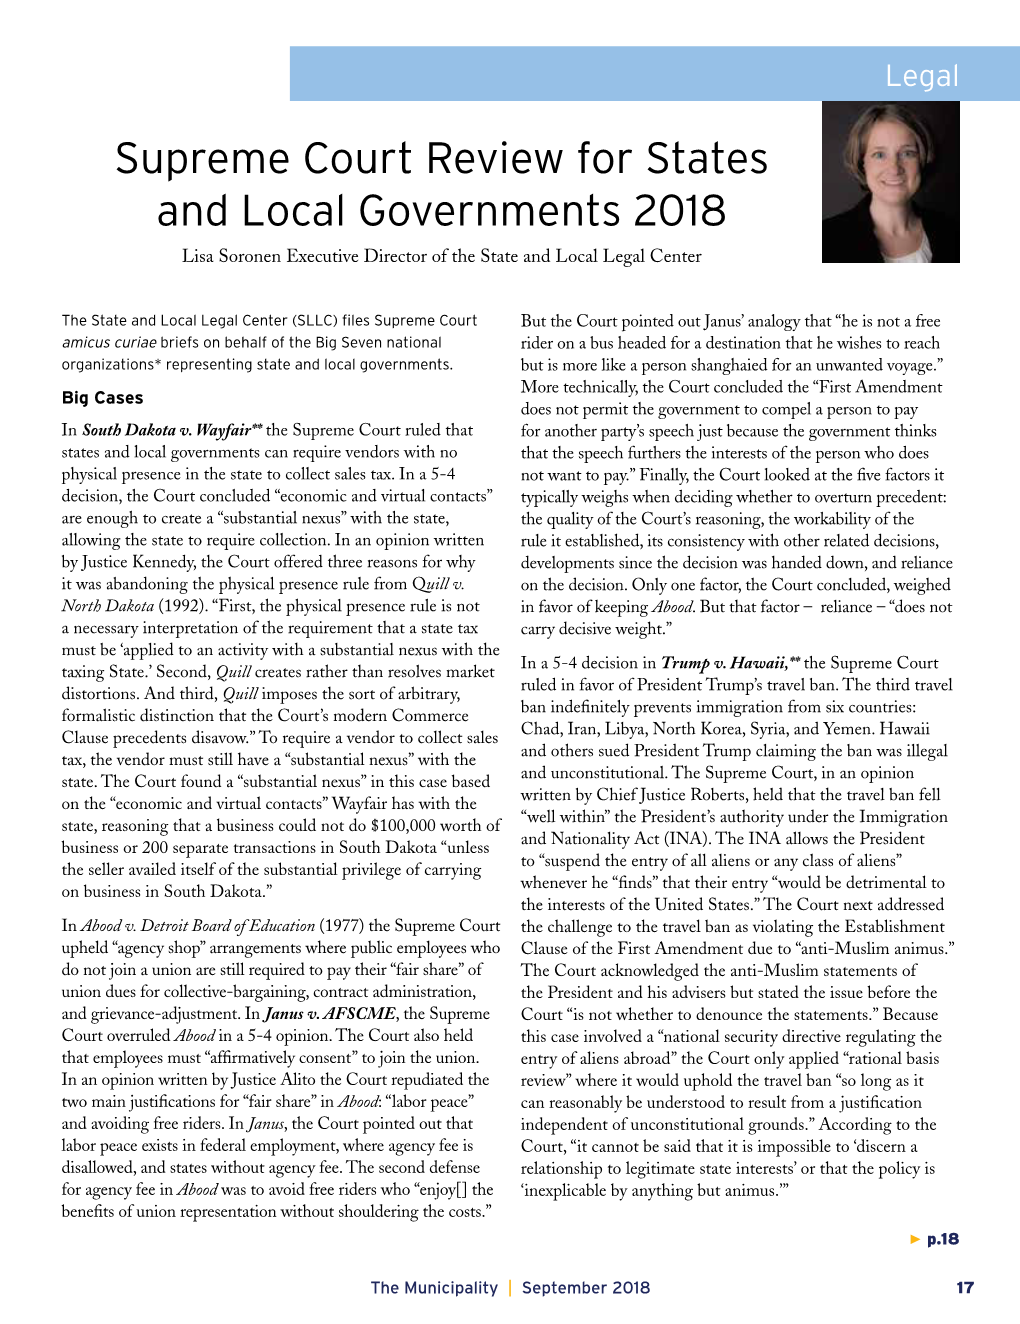 Supreme Court Review for States and Local Governments 2018 Lisa Soronen Executive Director of the State and Local Legal Center